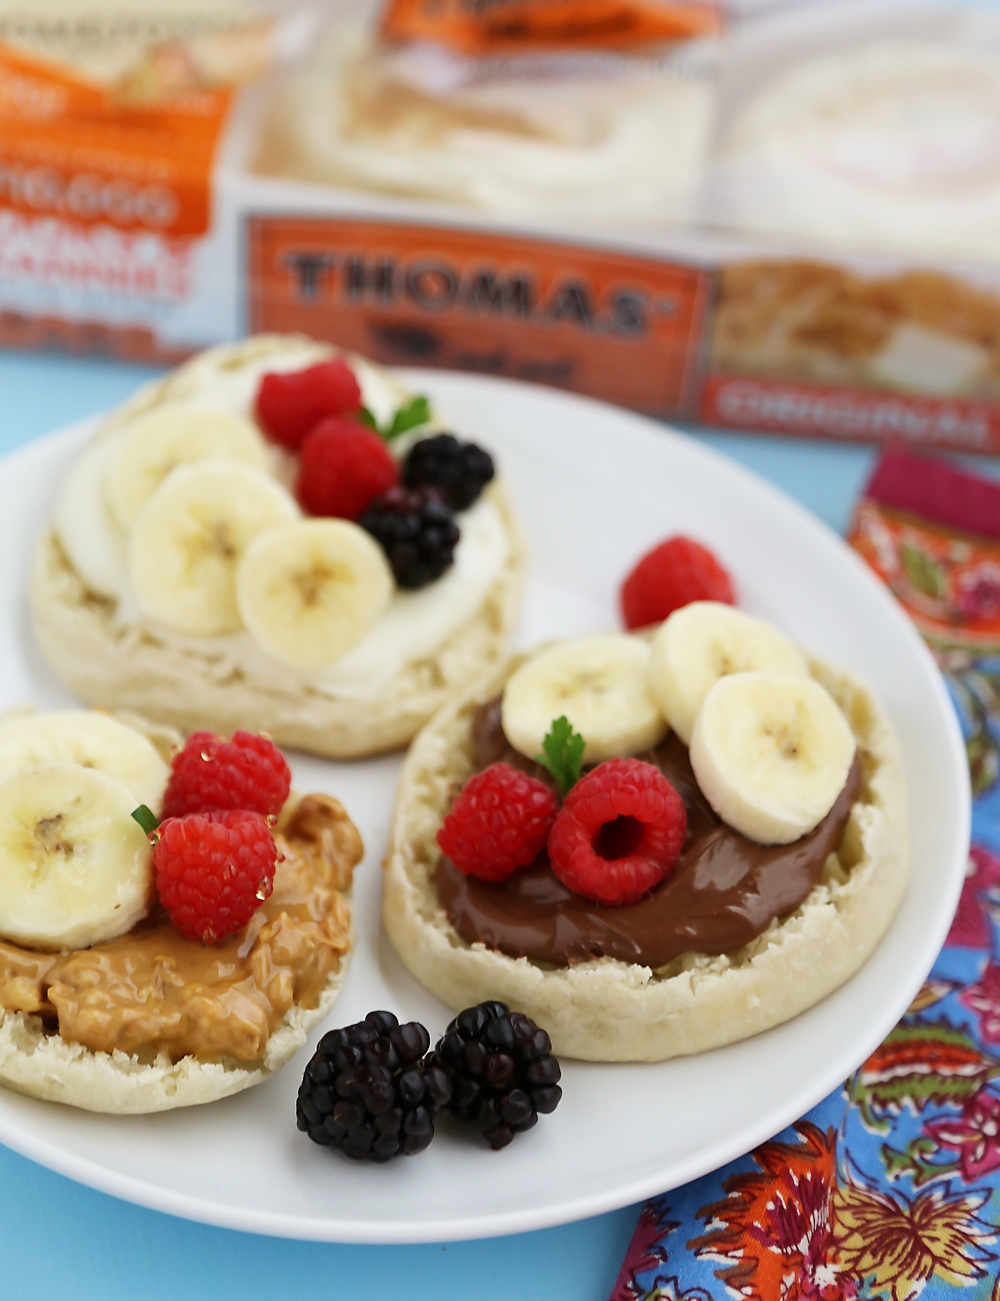 English Muffin Fruit Breakfast Pizzas - Spread with yogurt, Nutella or peanut butter and top with fresh fruit for a delicious morning treat! thecomfortofcooking.com